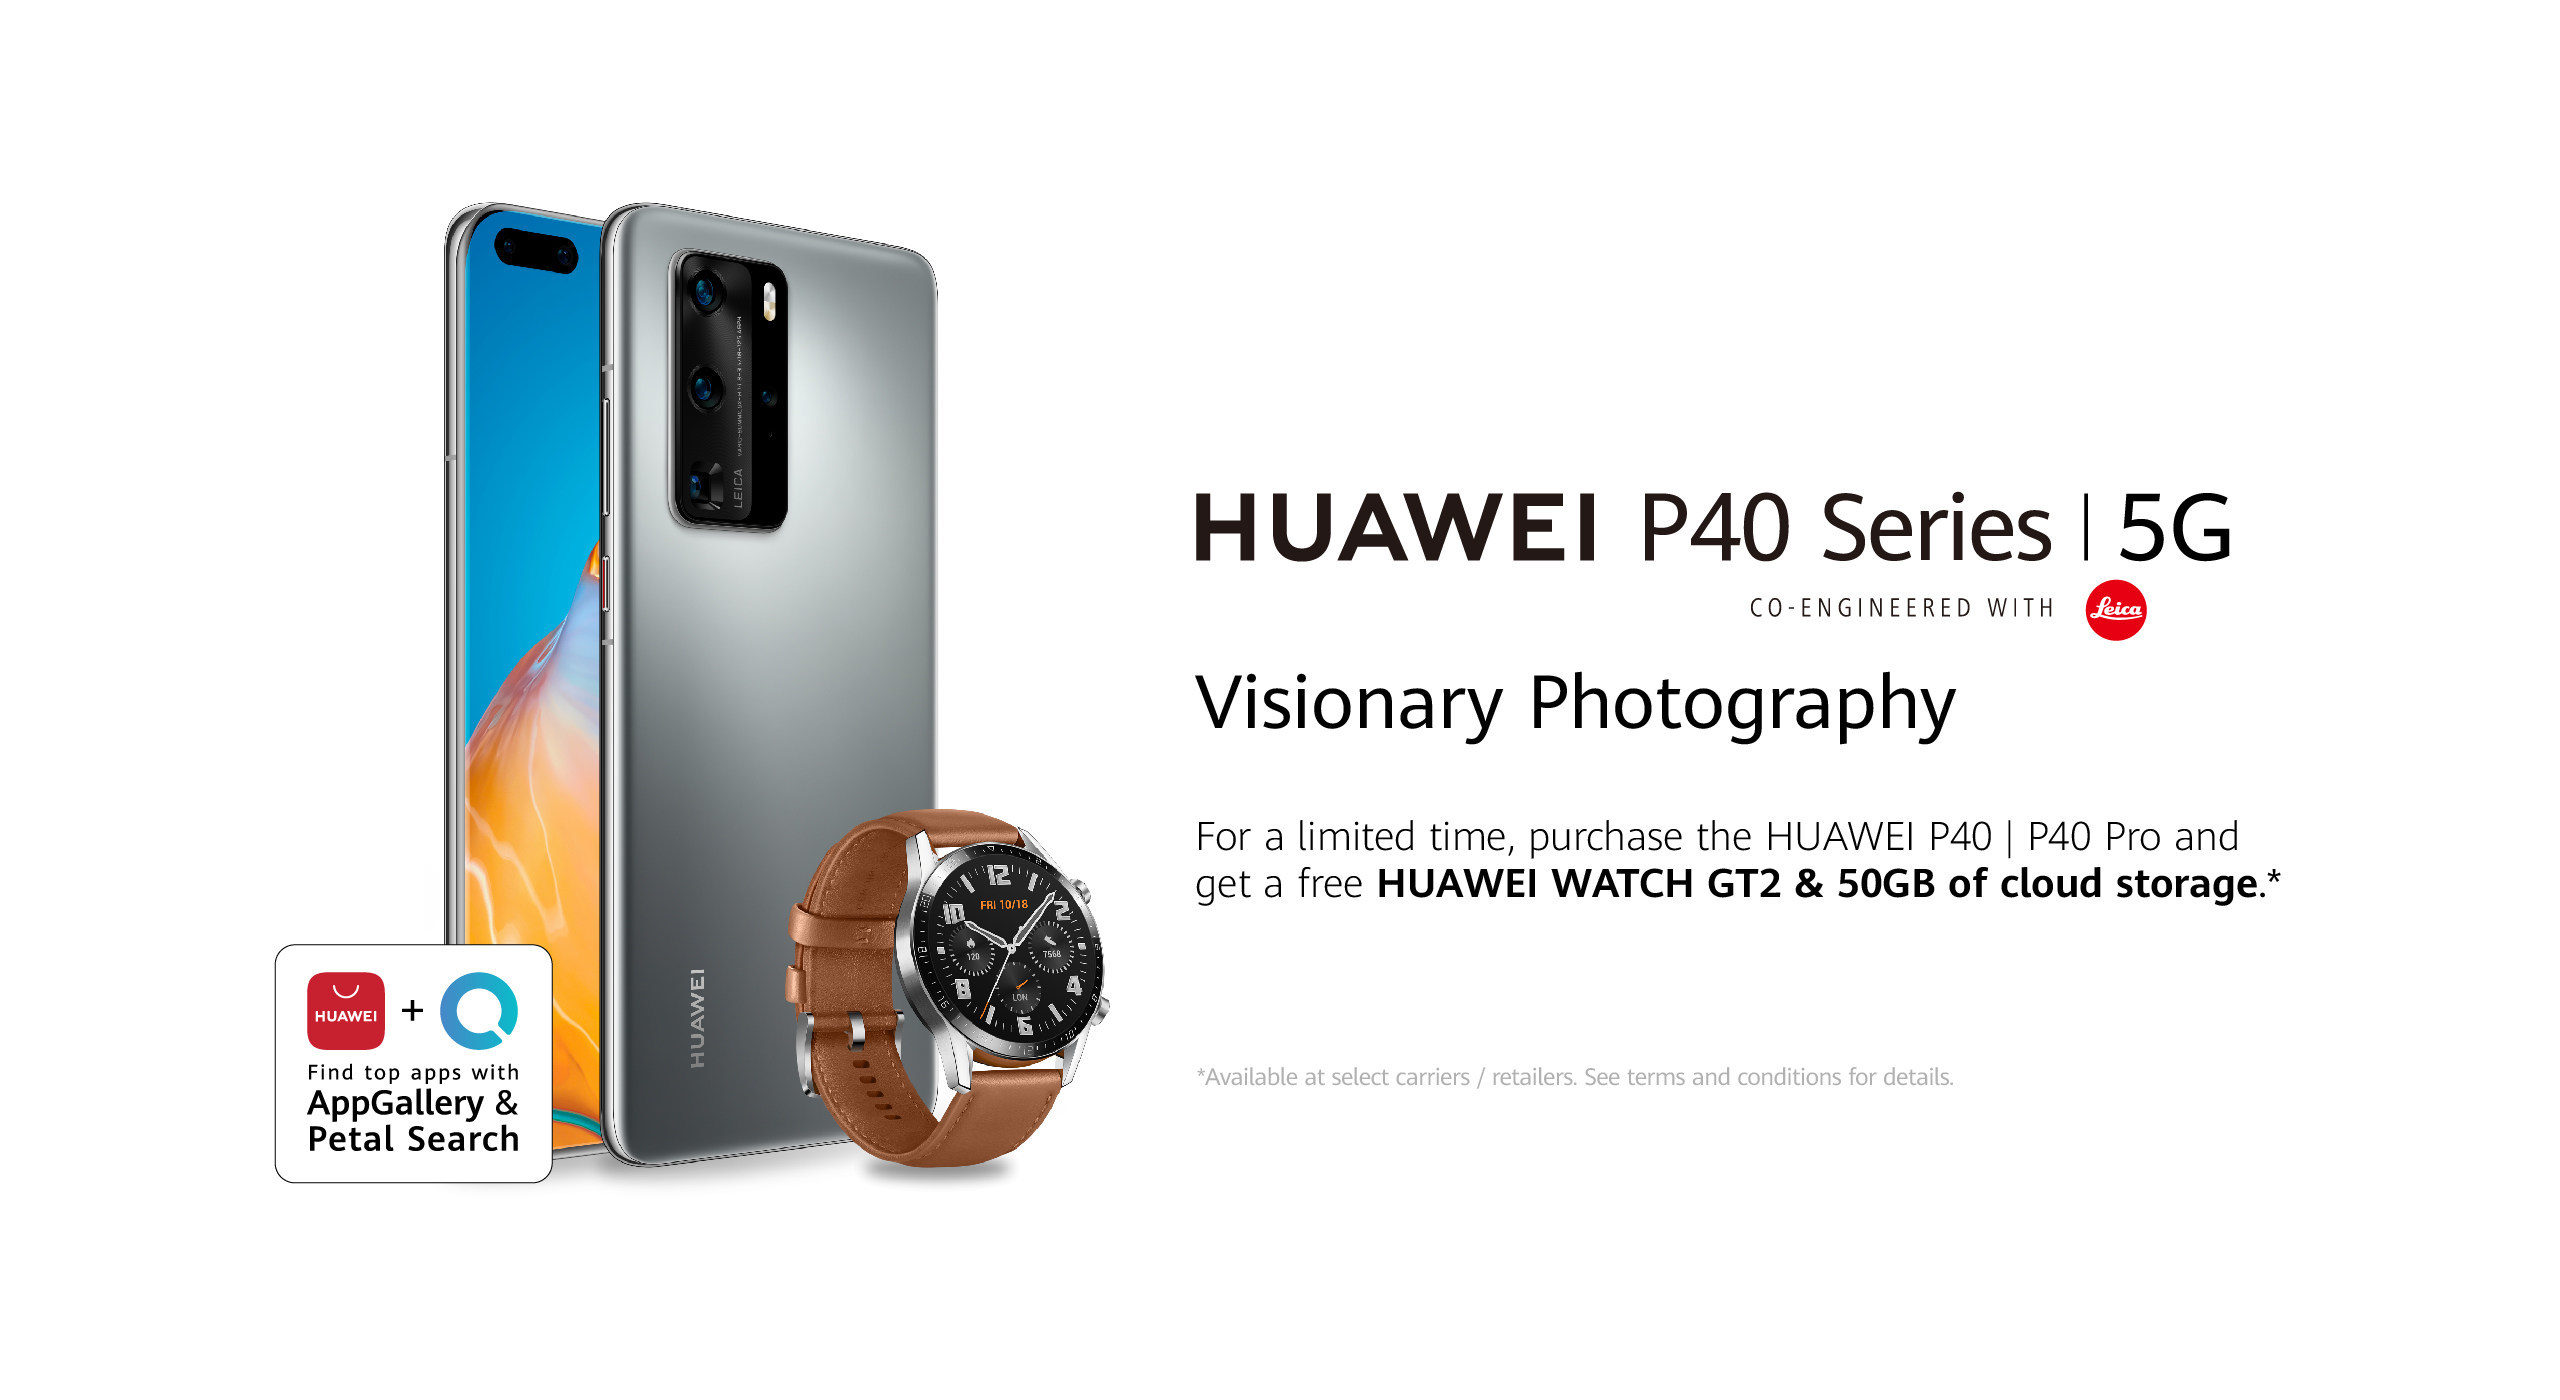 Huawei P40 Series 5g With World S Best Smartphone Camera And The New Huawei Appgallery And Petal Search Now Available In Canada - inauthor official roblox